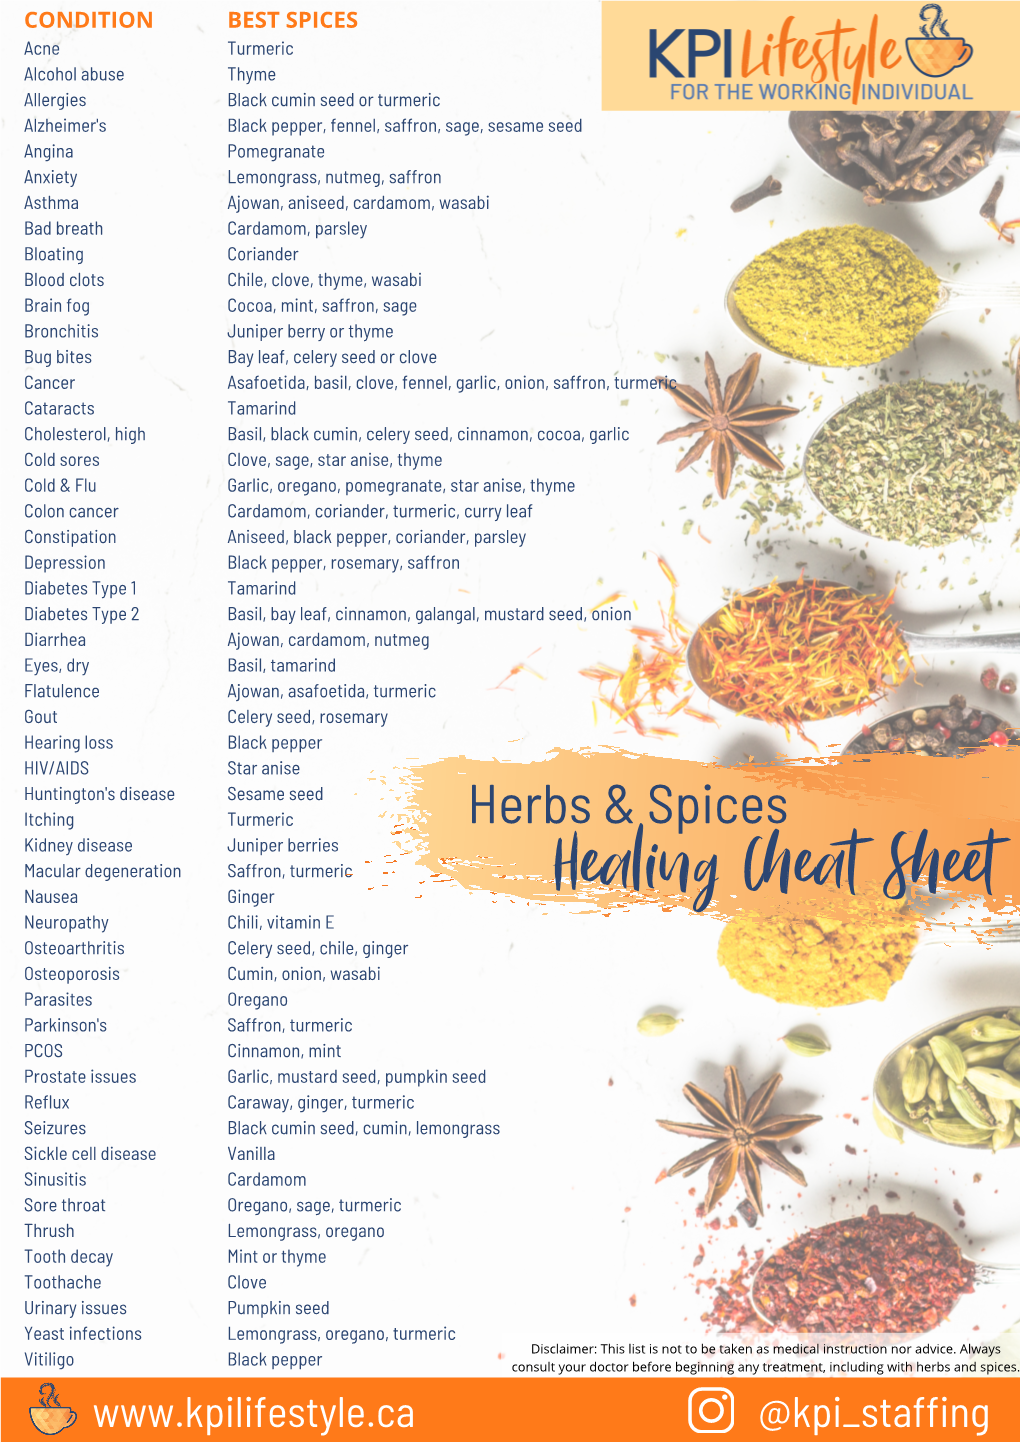 Herbs and Spices Healing Cheat Sheet